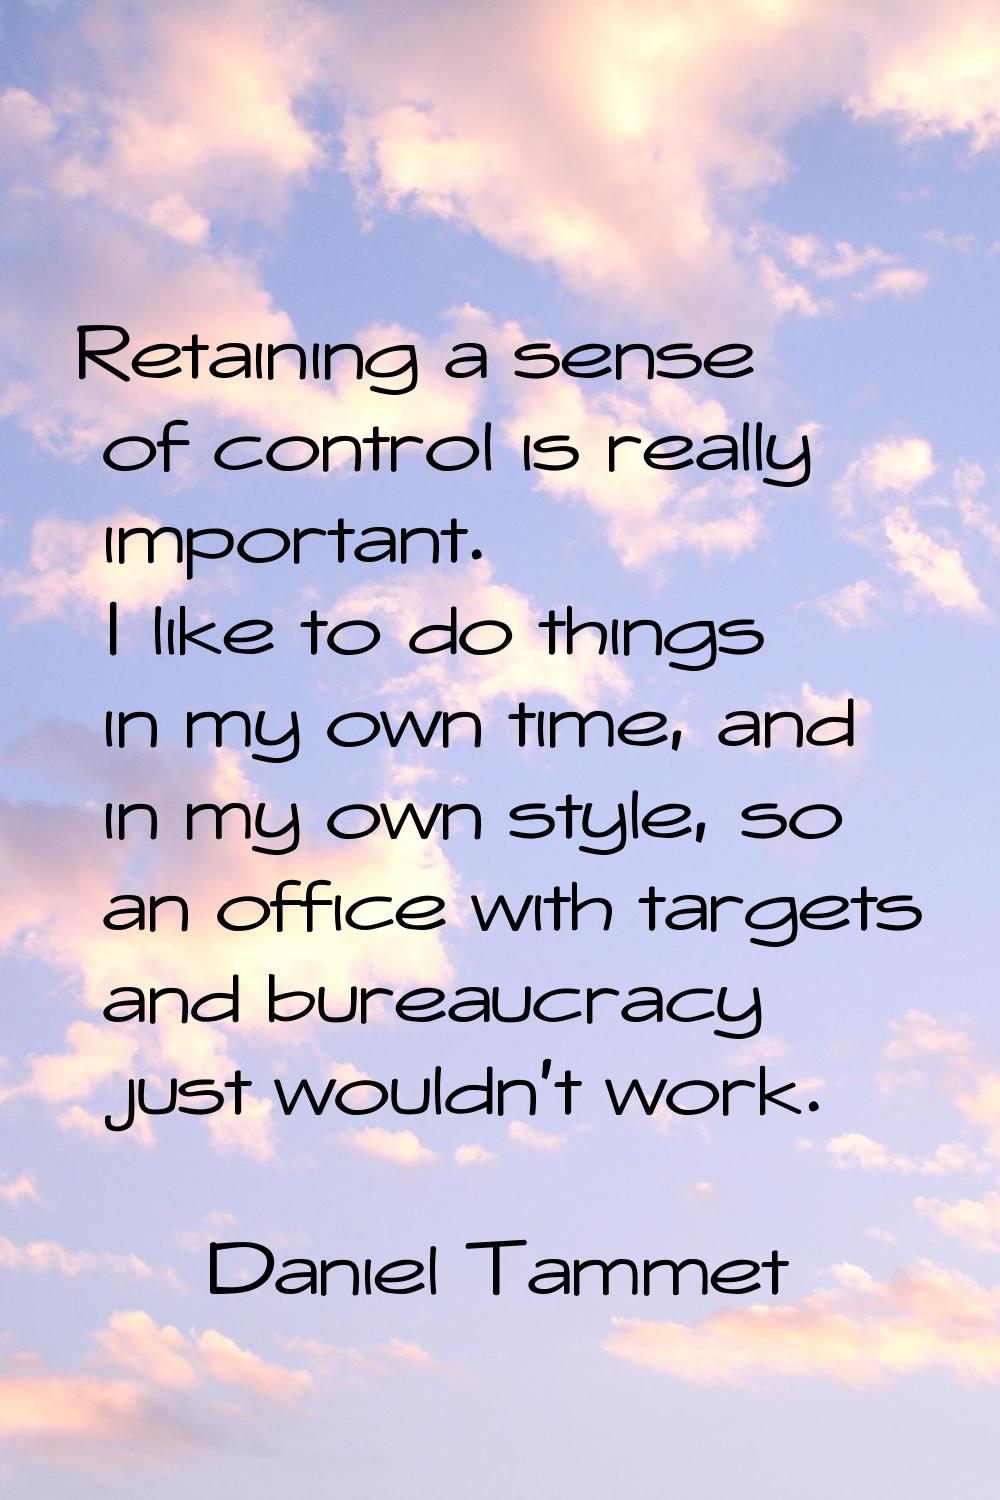 Retaining a sense of control is really important. I like to do things in my own time, and in my own